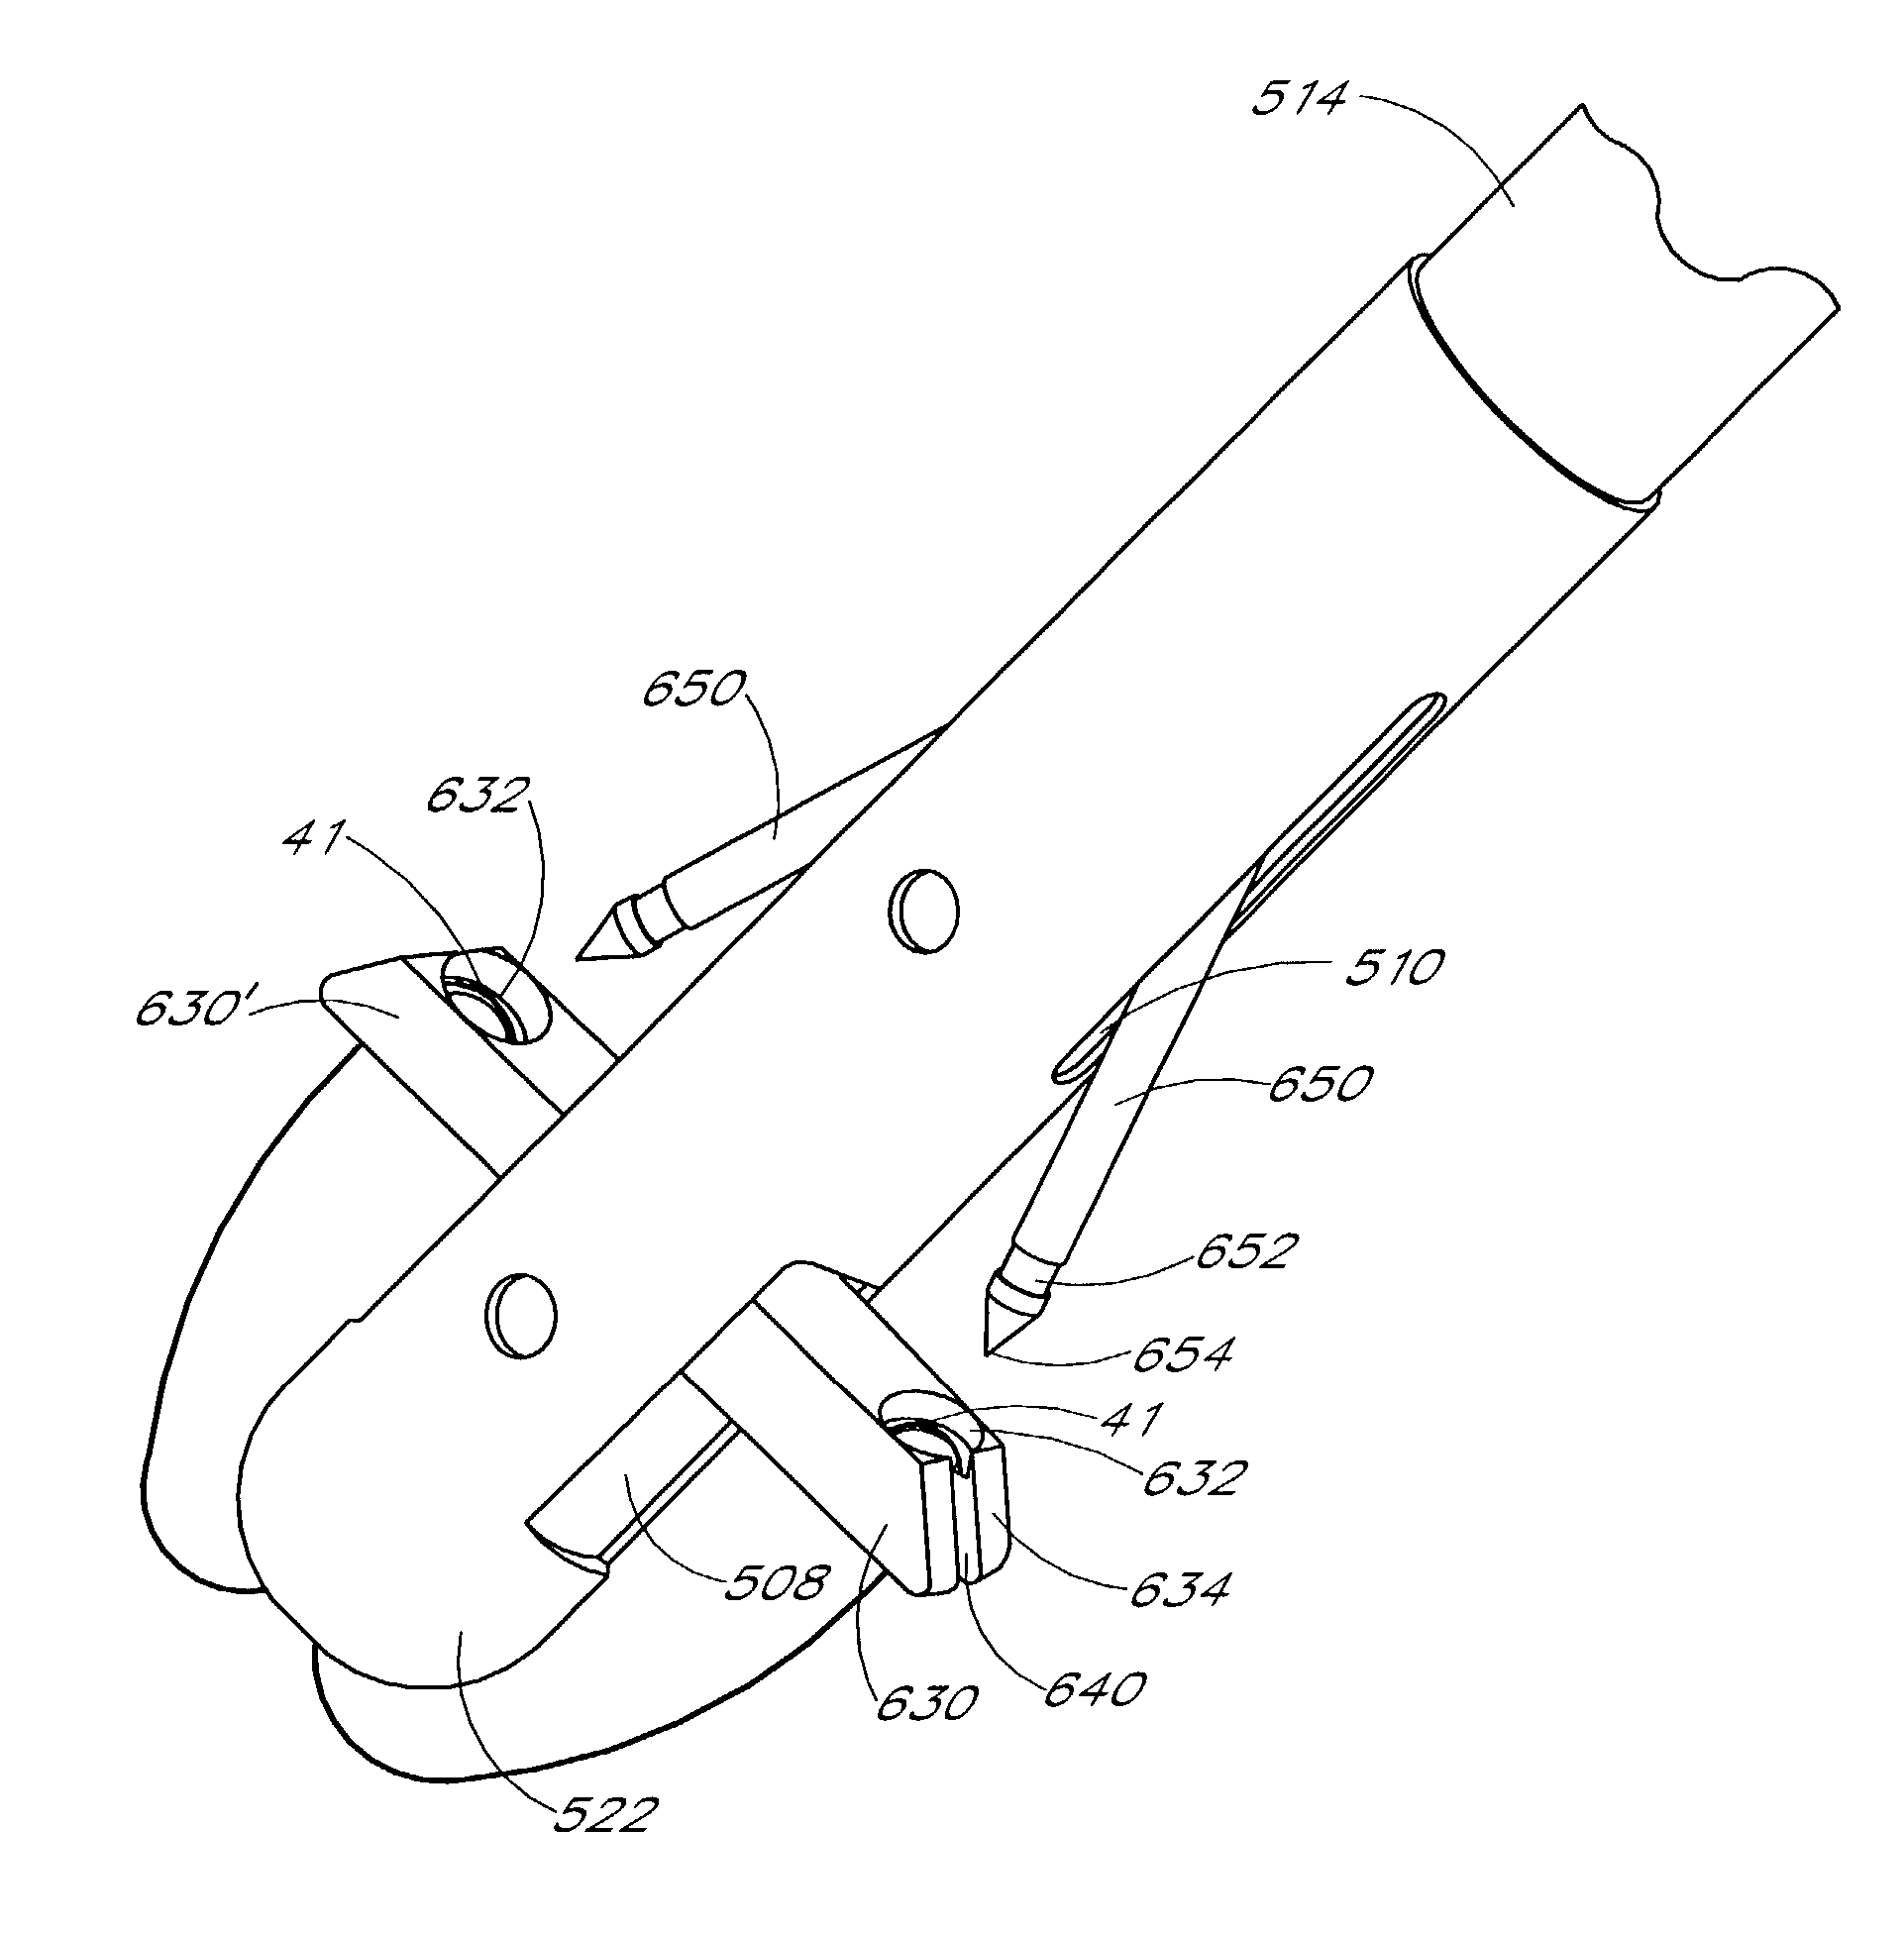 Suturing device and method for sealing an opening in a blood vessel for other biological structure